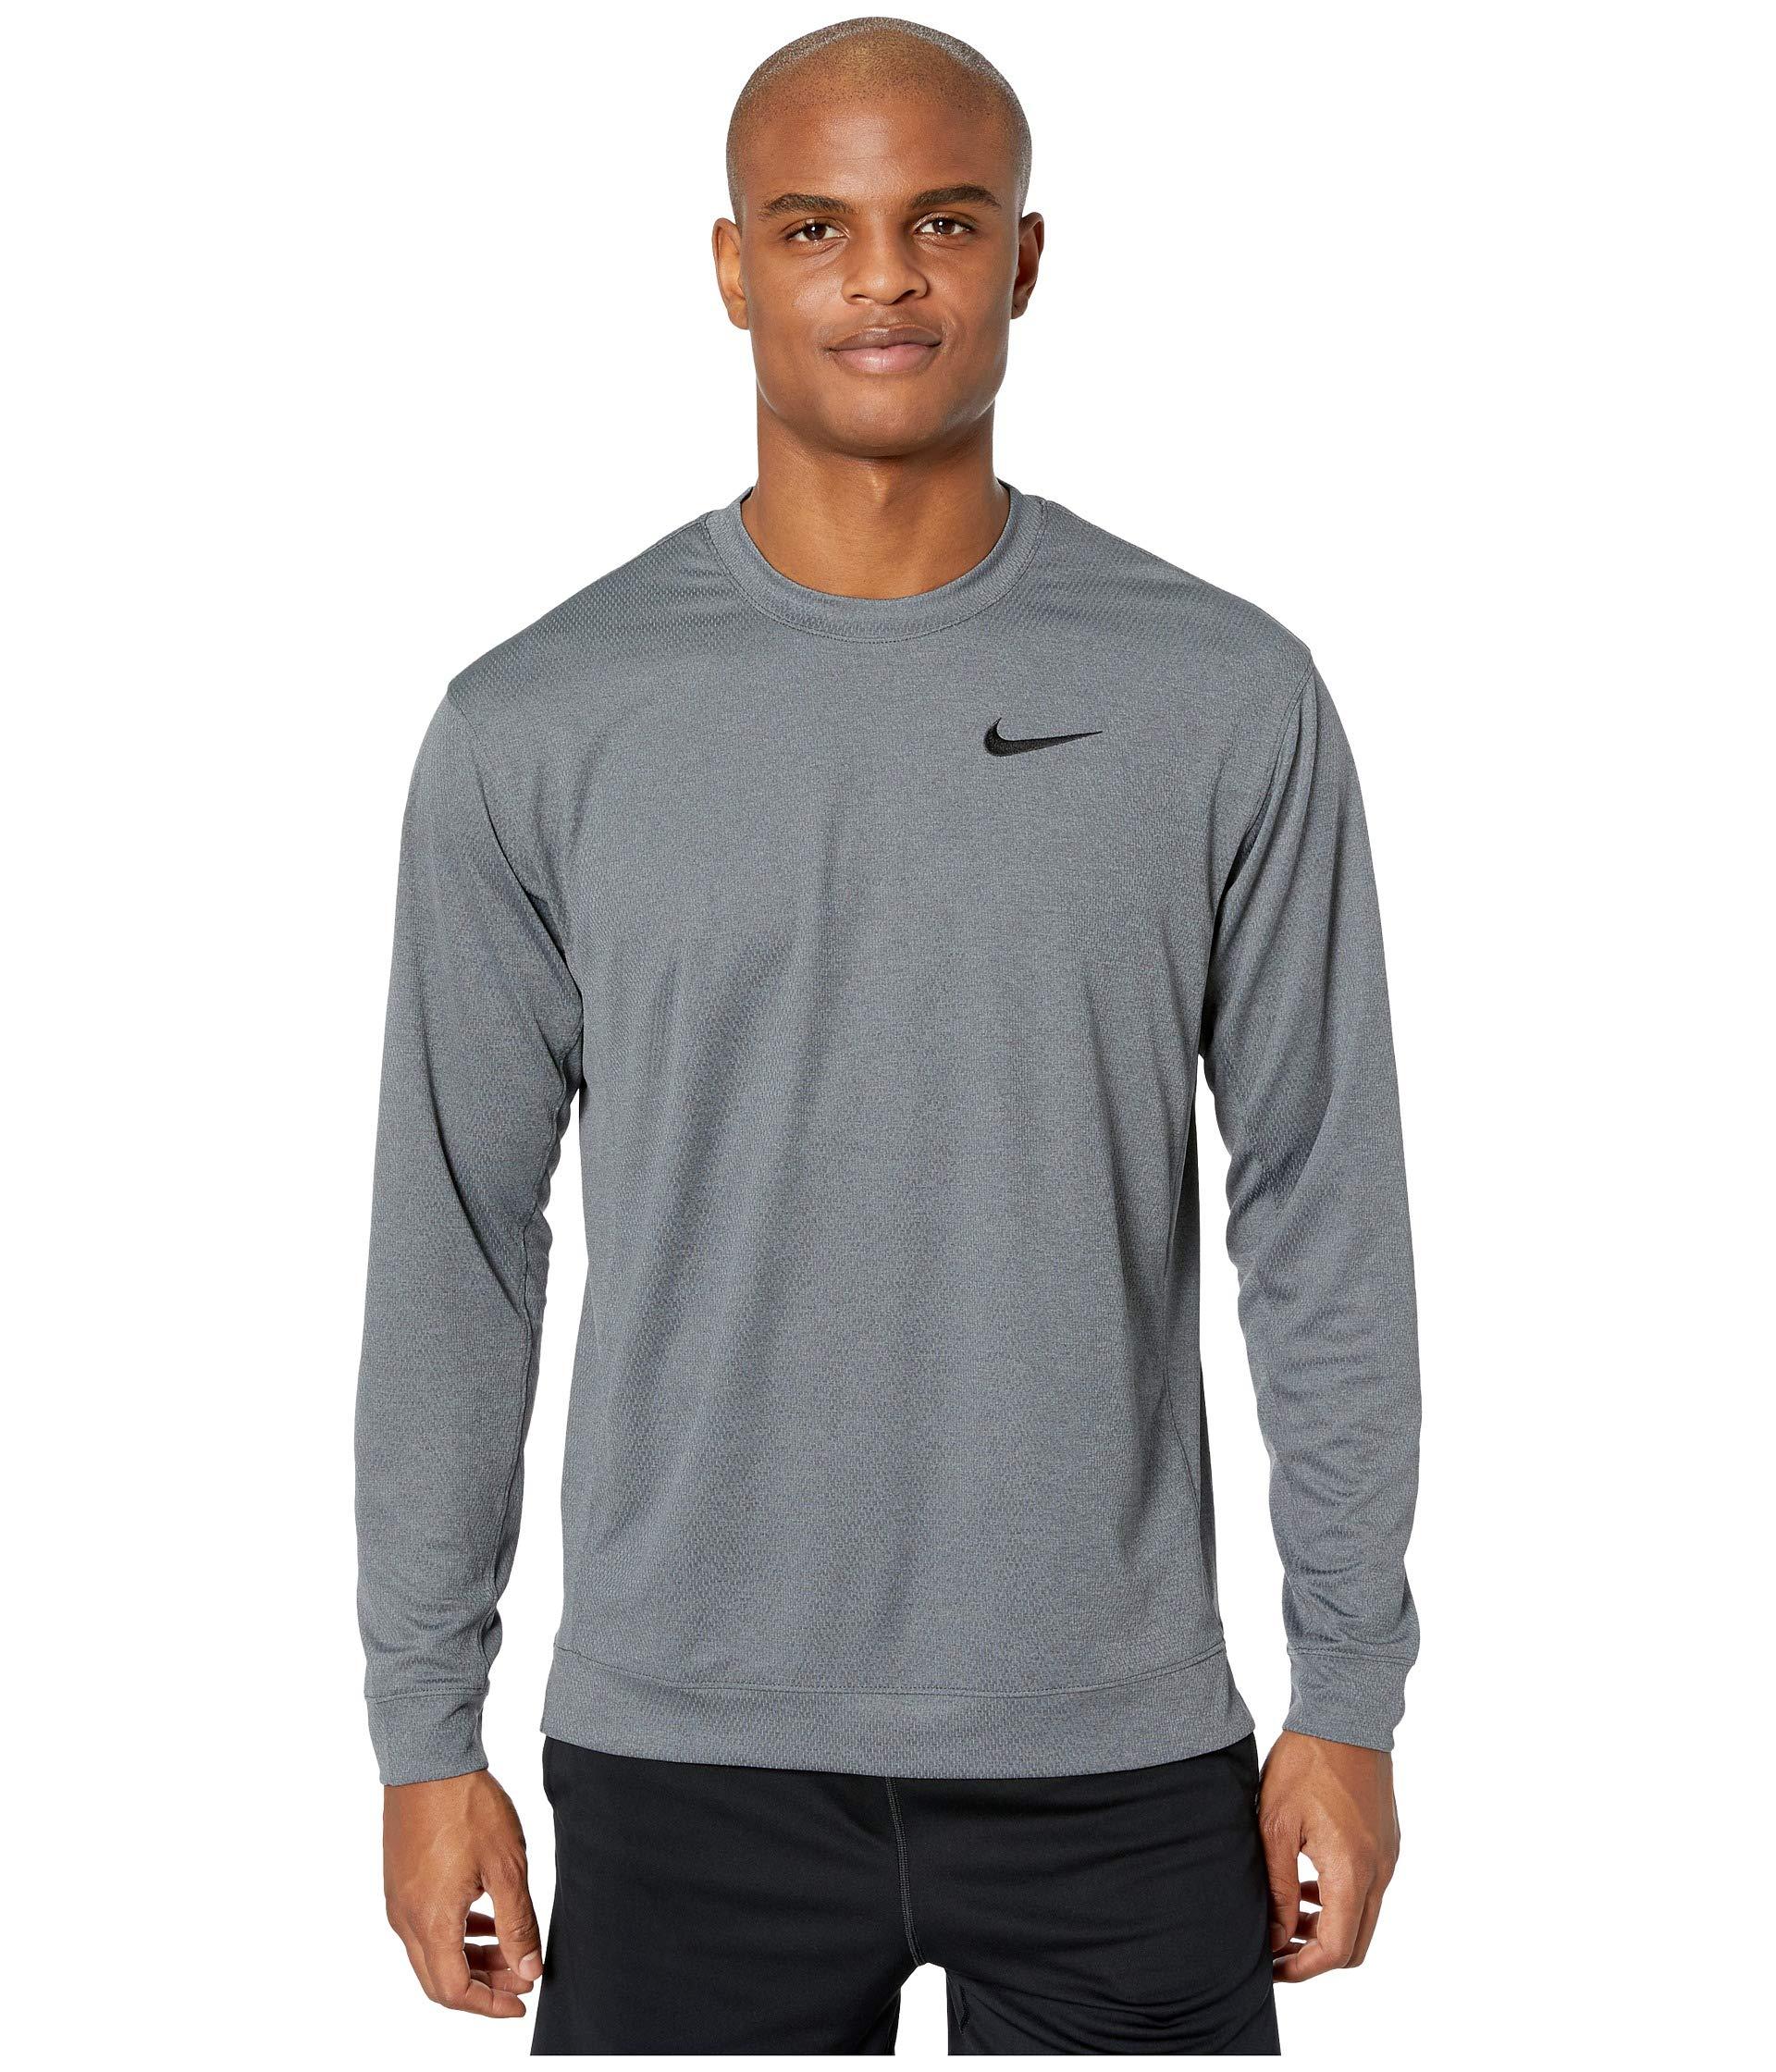 Nike Synthetic Dry Classic Top Long Sleeve Mesh in Gray for Men - Lyst